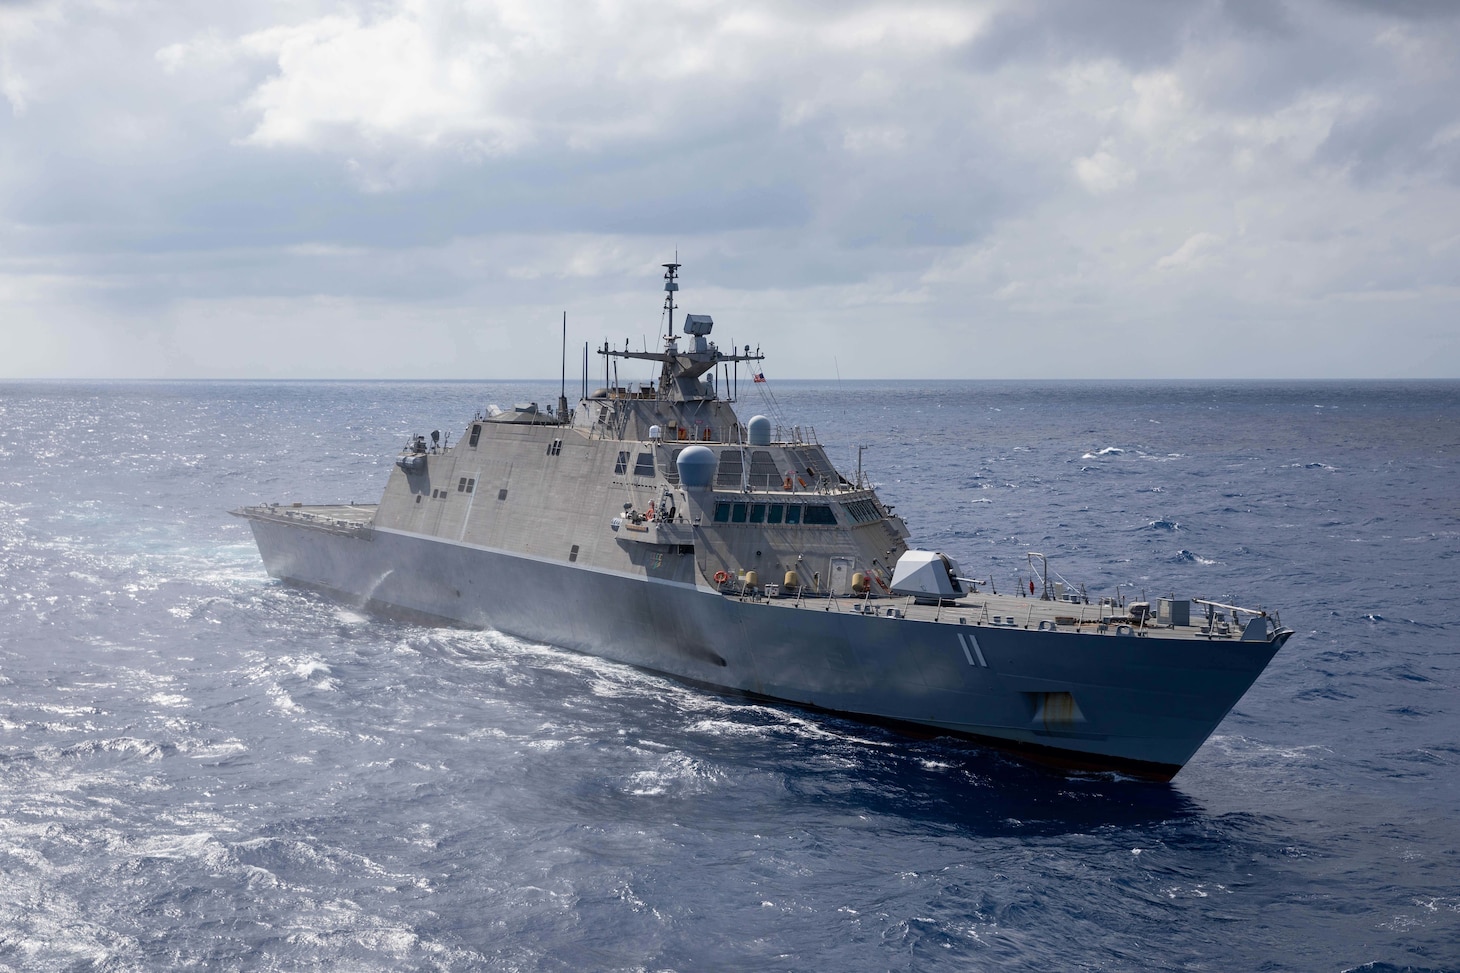 USS Sioux City (LCS 11), transits the Caribbean Sea.